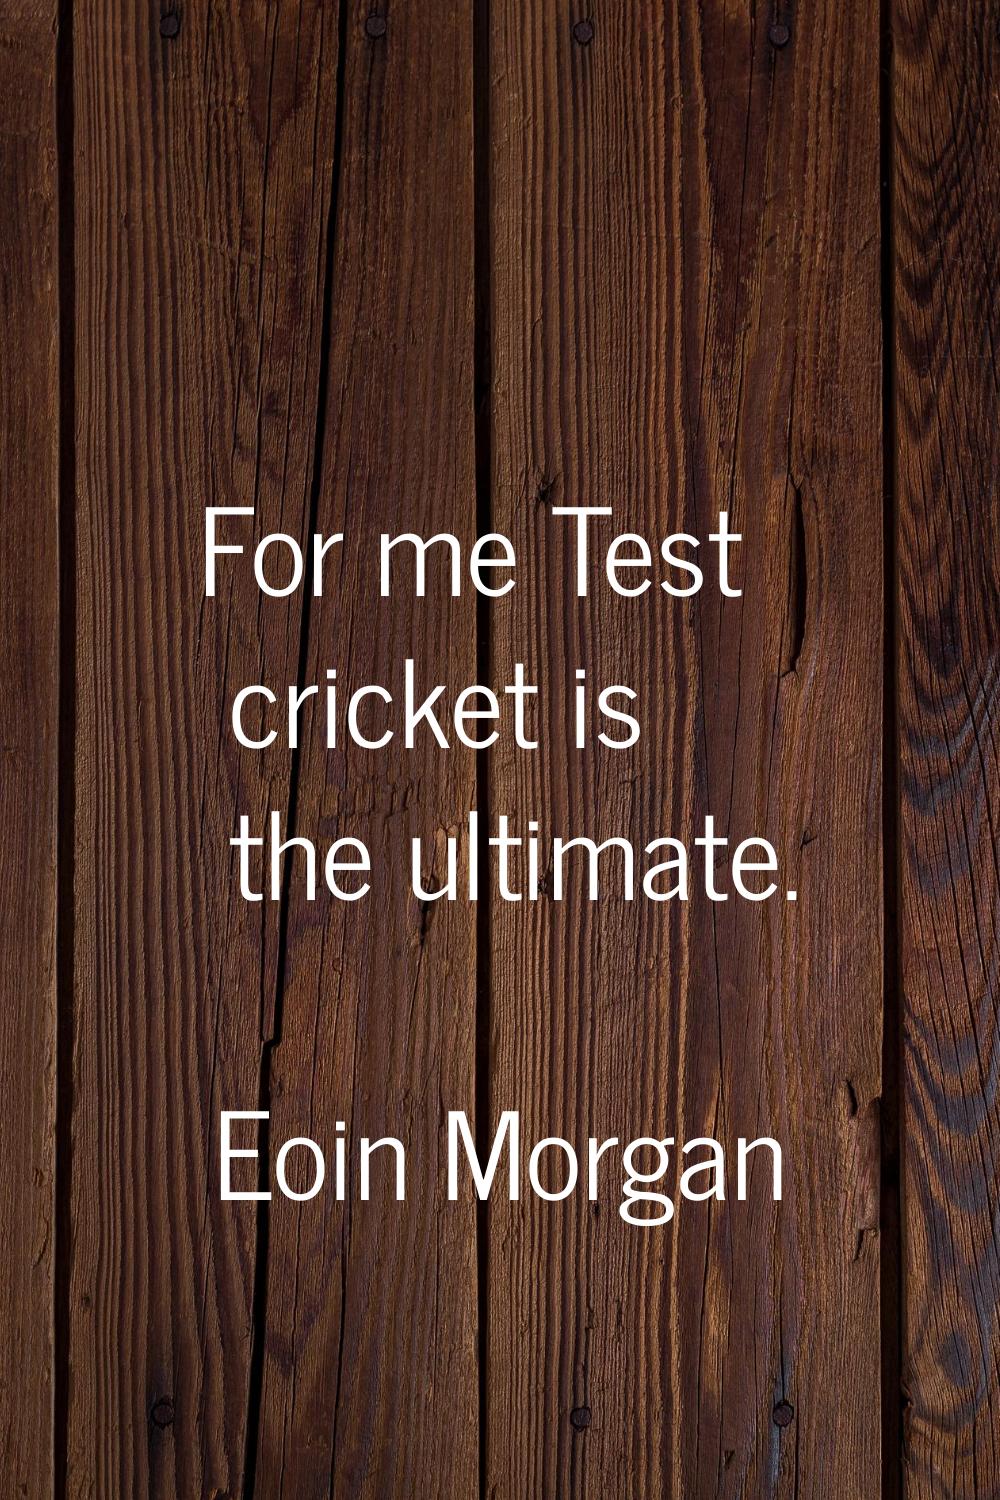 For me Test cricket is the ultimate.